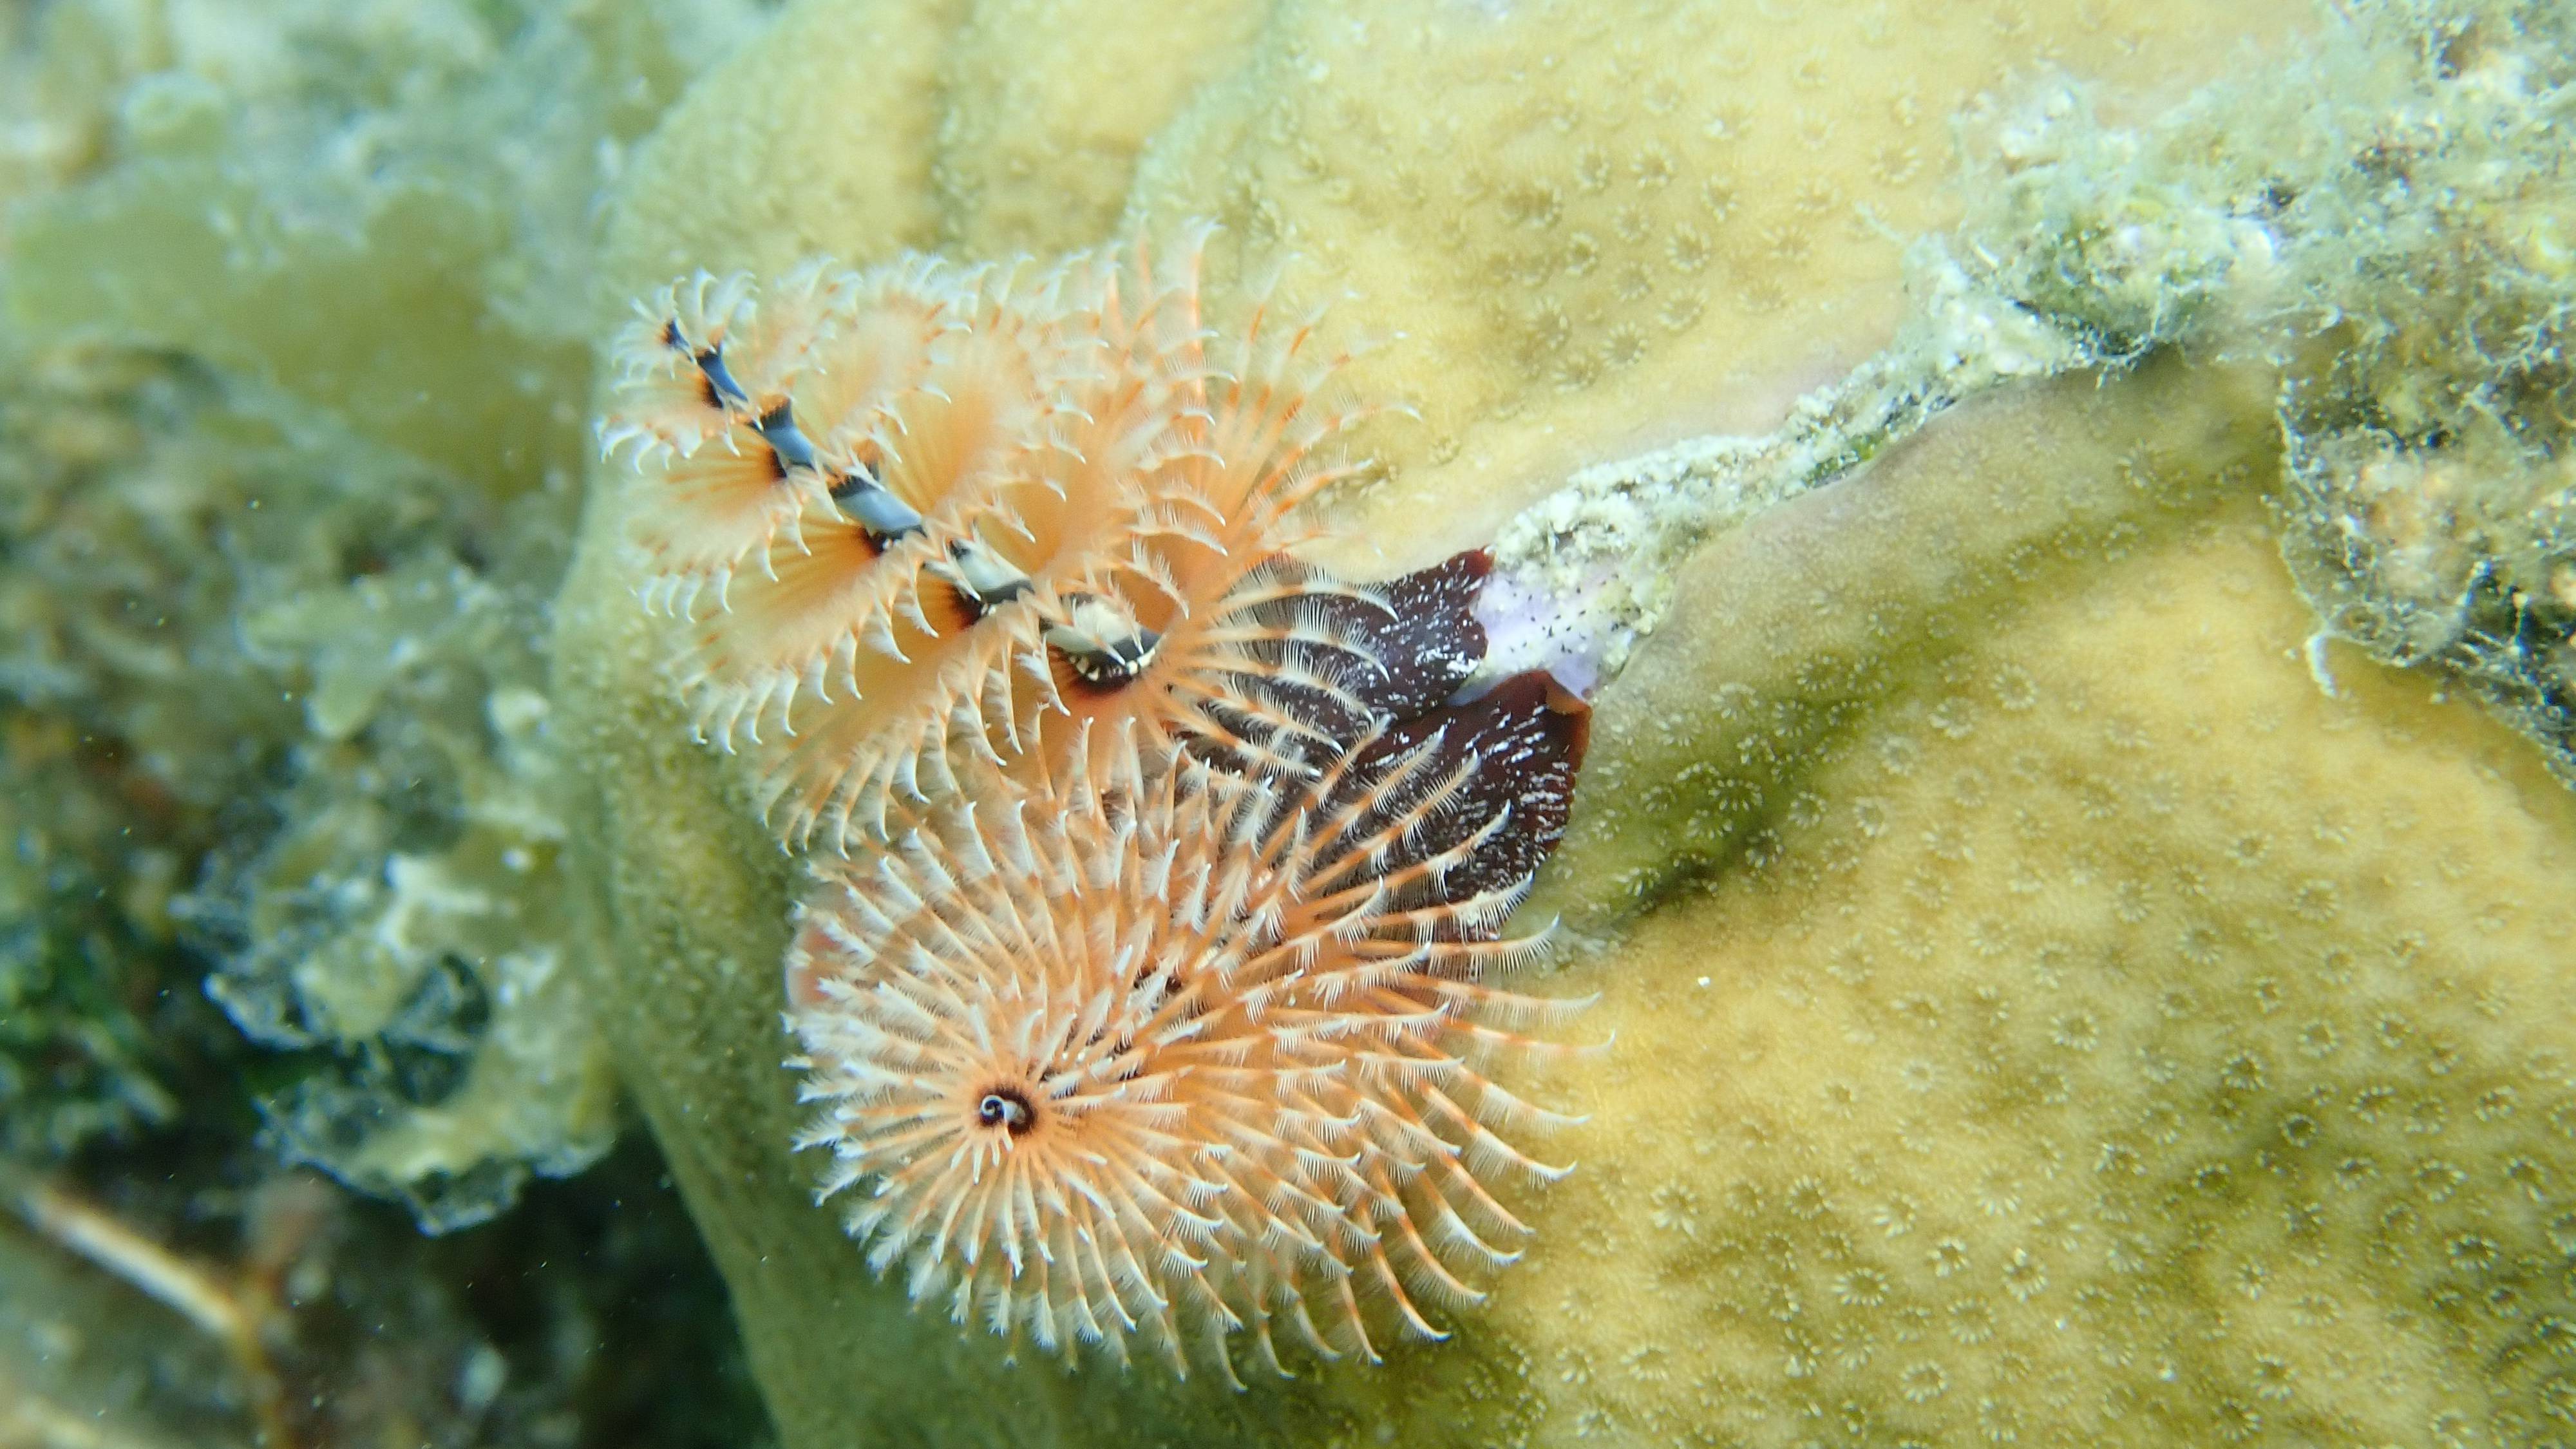 Featherduster worm 